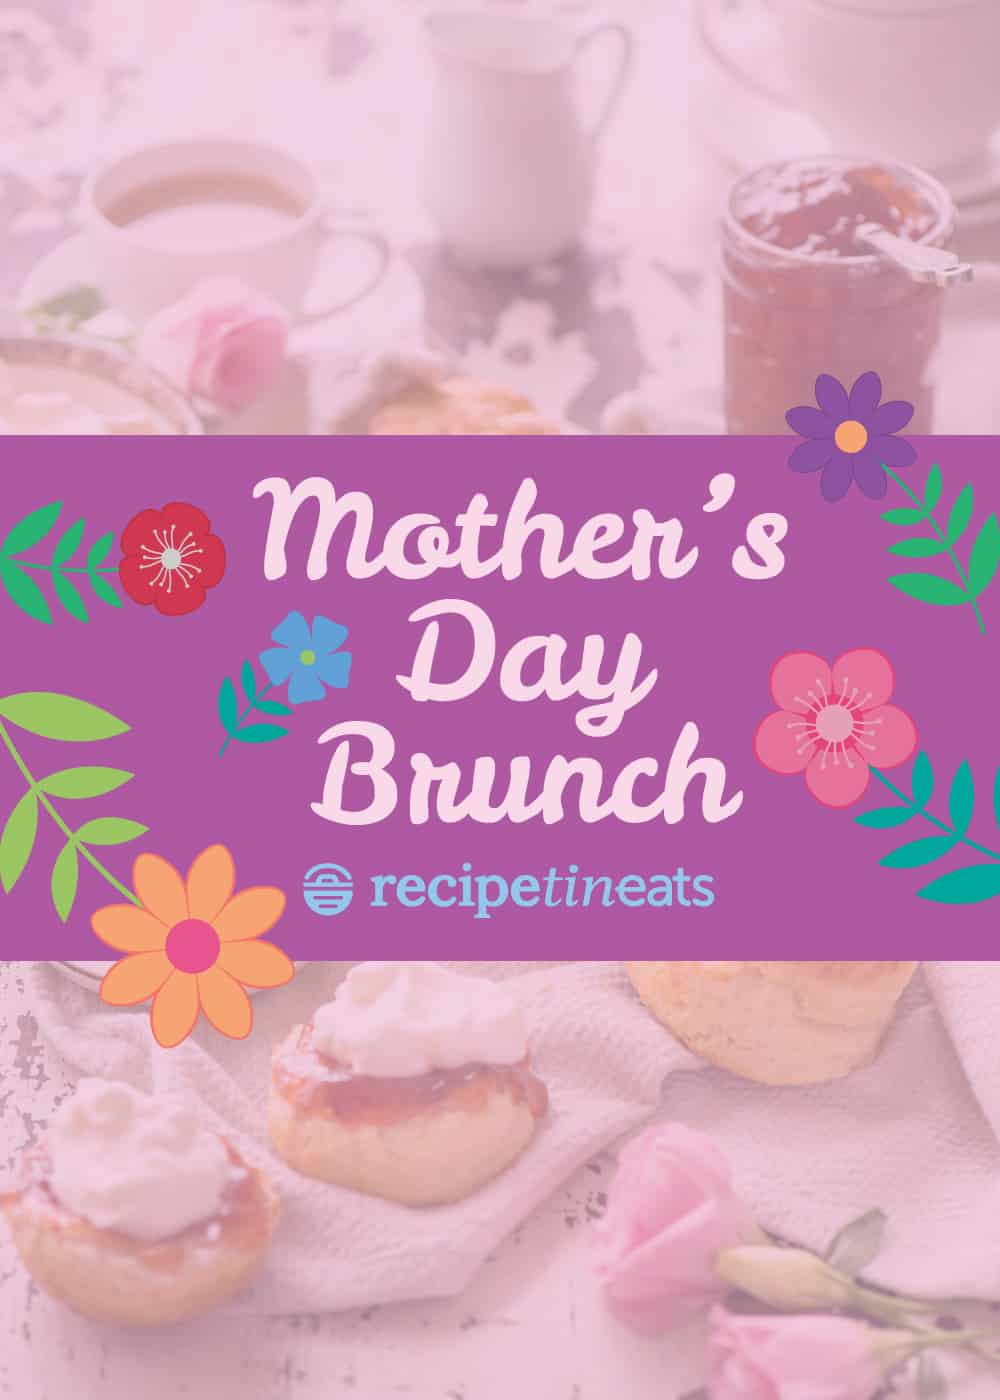 Mothers' Day Brunch Recipes and Menu